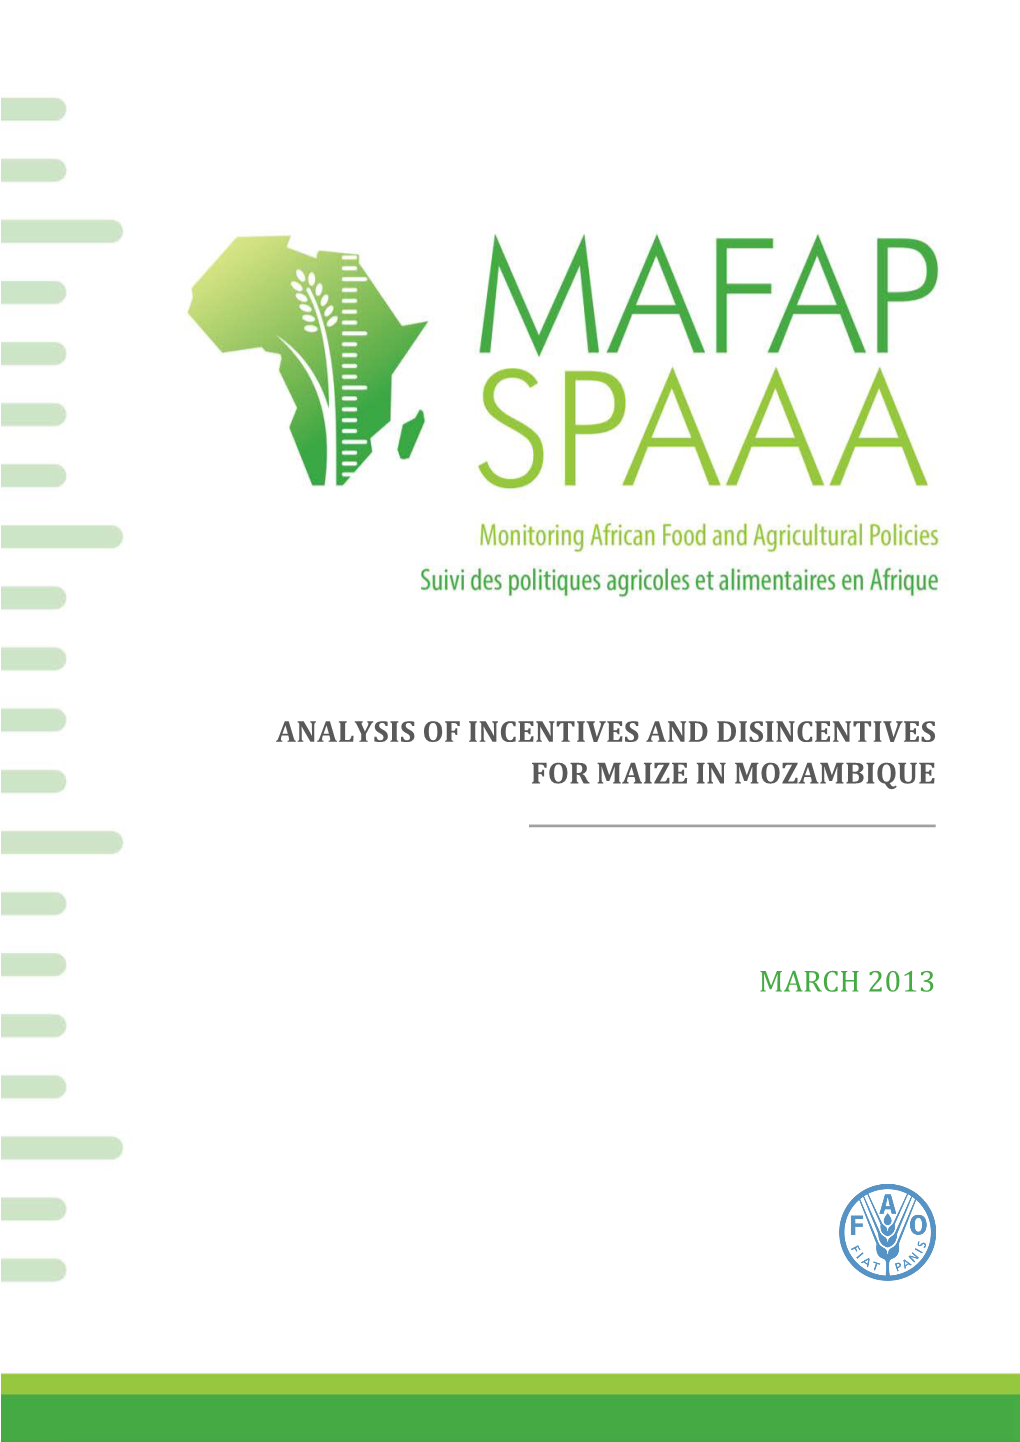 Analysis of Incentives and Disincentives for Maize in Mozambique